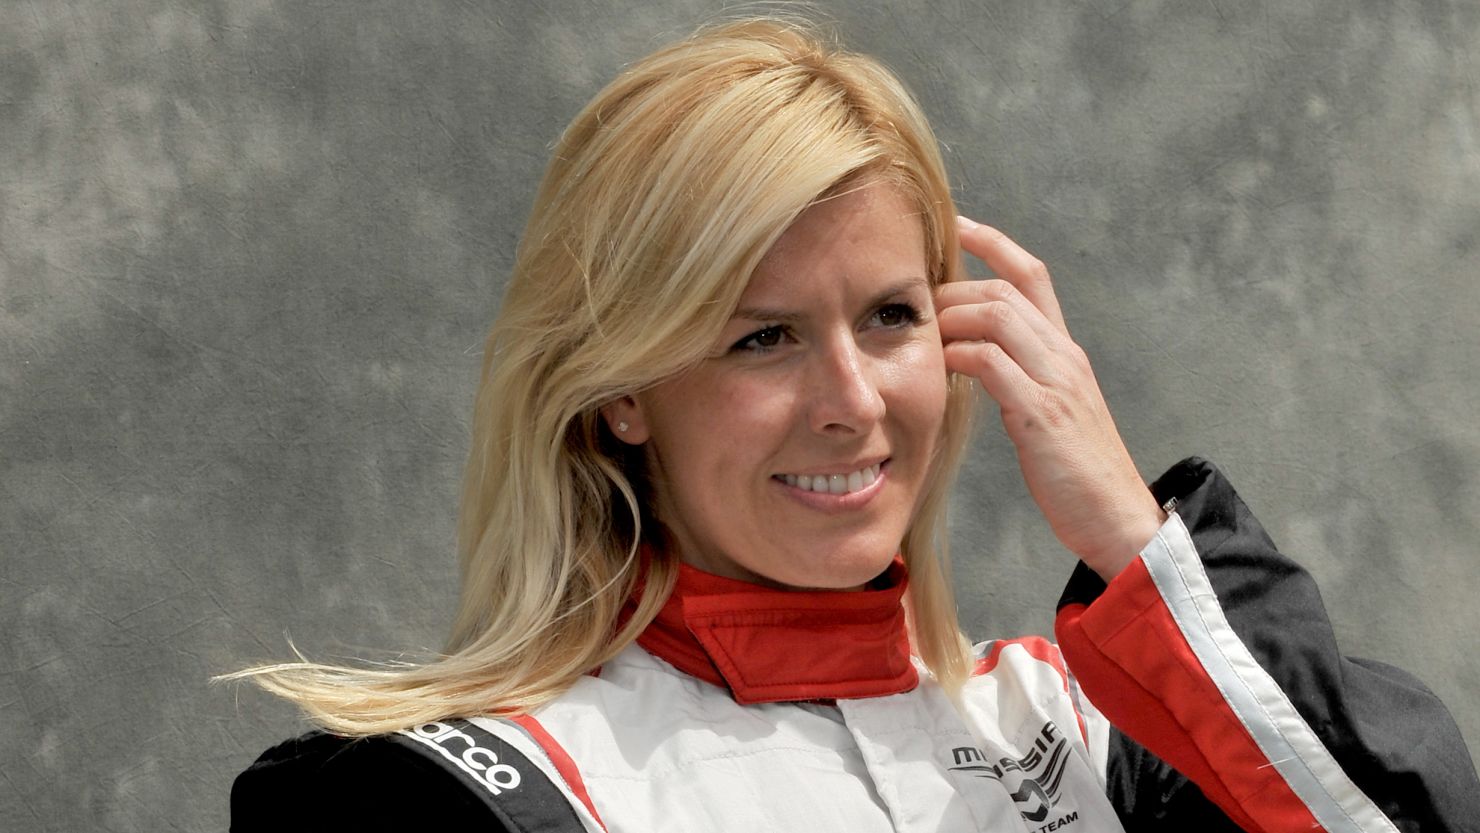 Spain's Maria de Villota joined the Marussia team as a test driver in March this year.